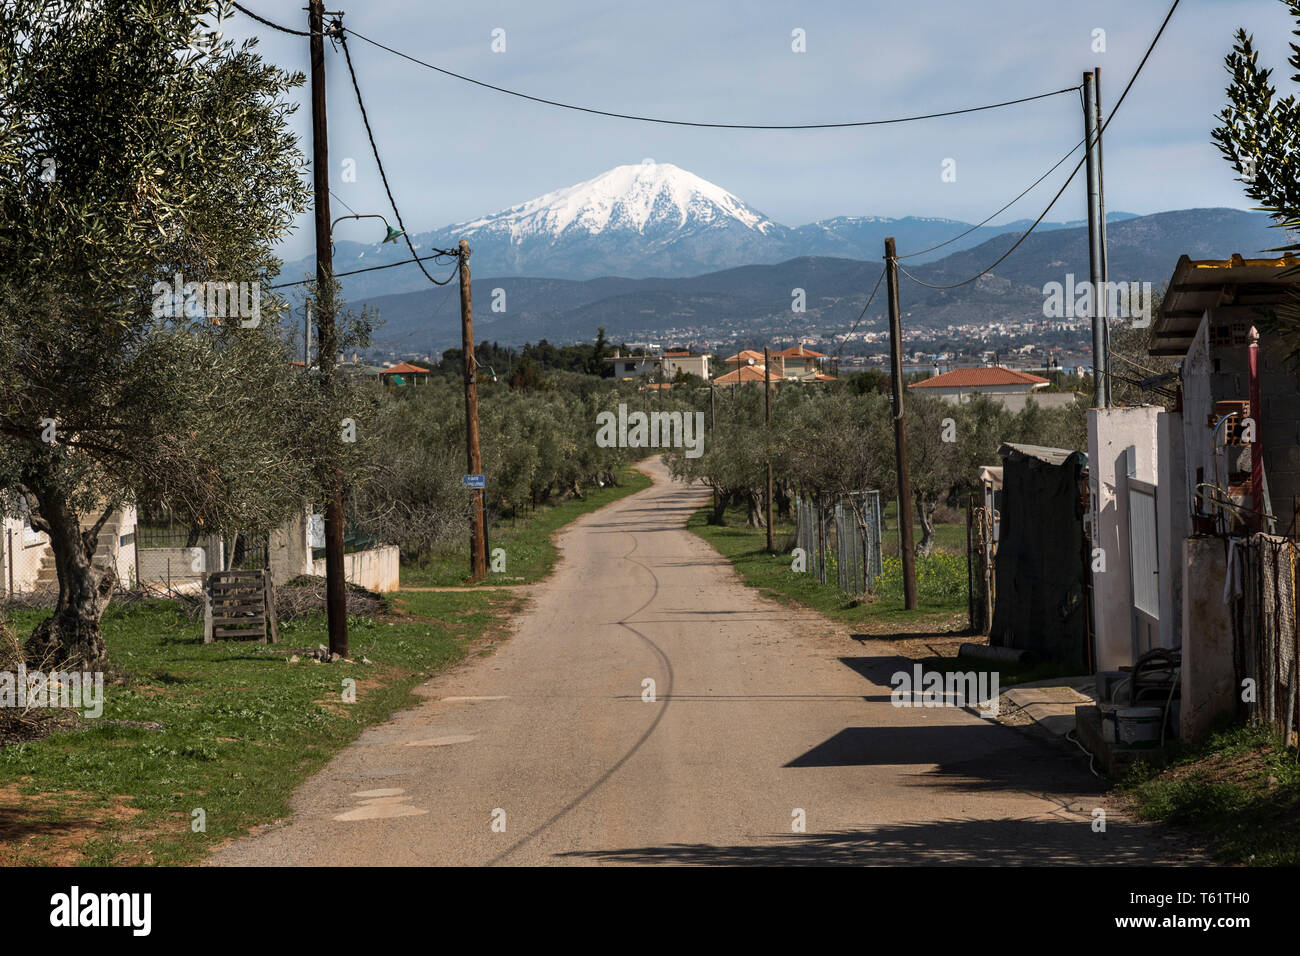 Near Avlida village,a  country road winds its way through farmland in the direction of Mount Olympus whose snow-capped peak shows over the horizon. Stock Photo